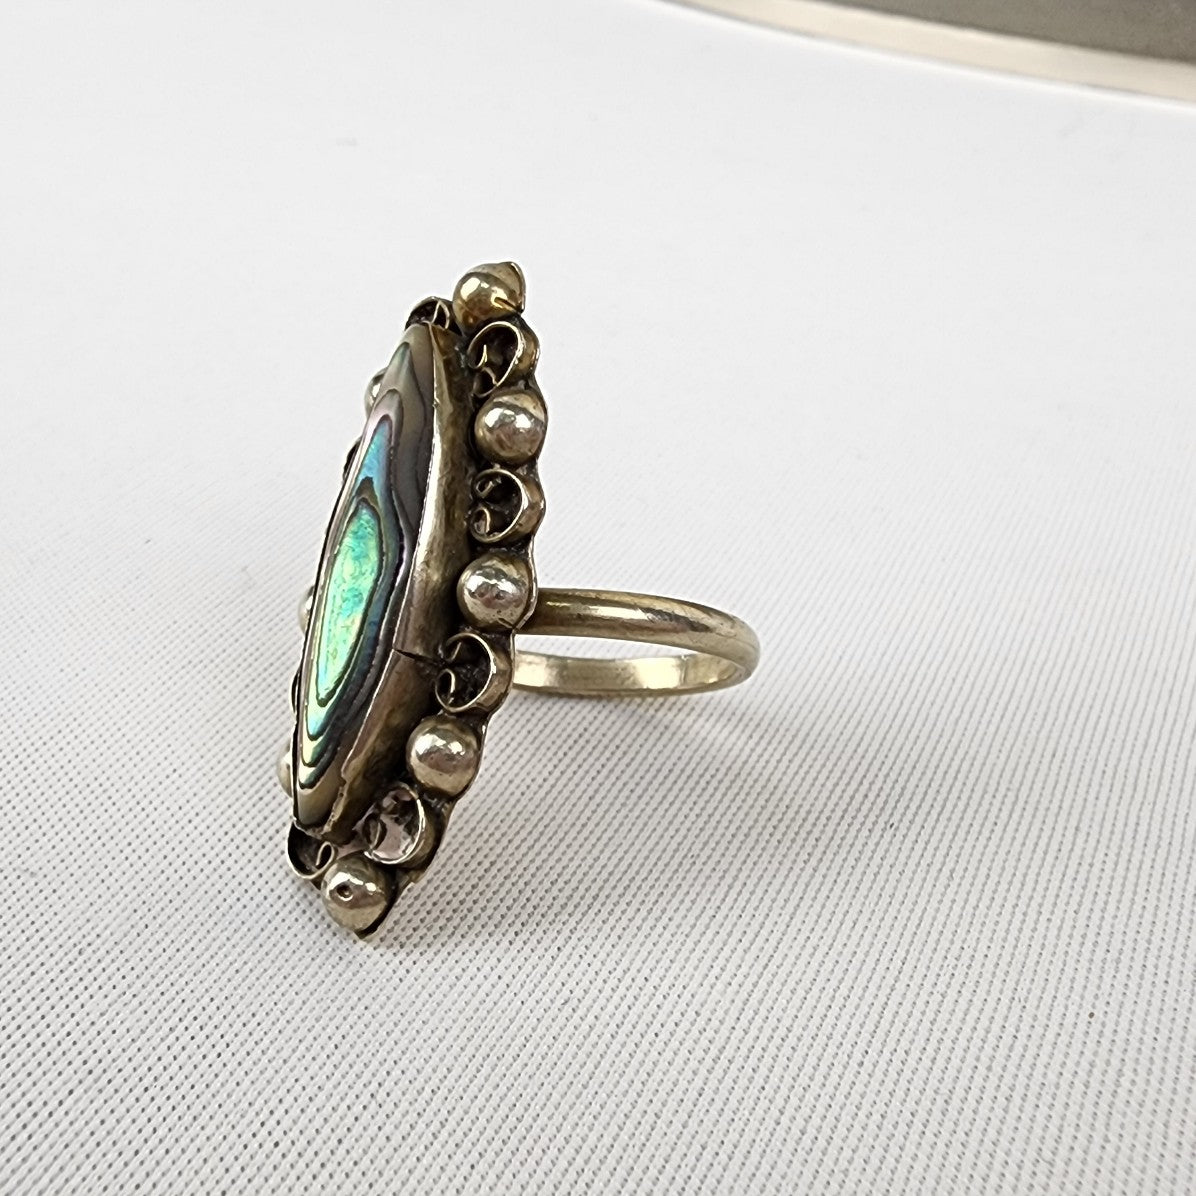 Vintage Alpaca Silver Abalone Ring Size 8